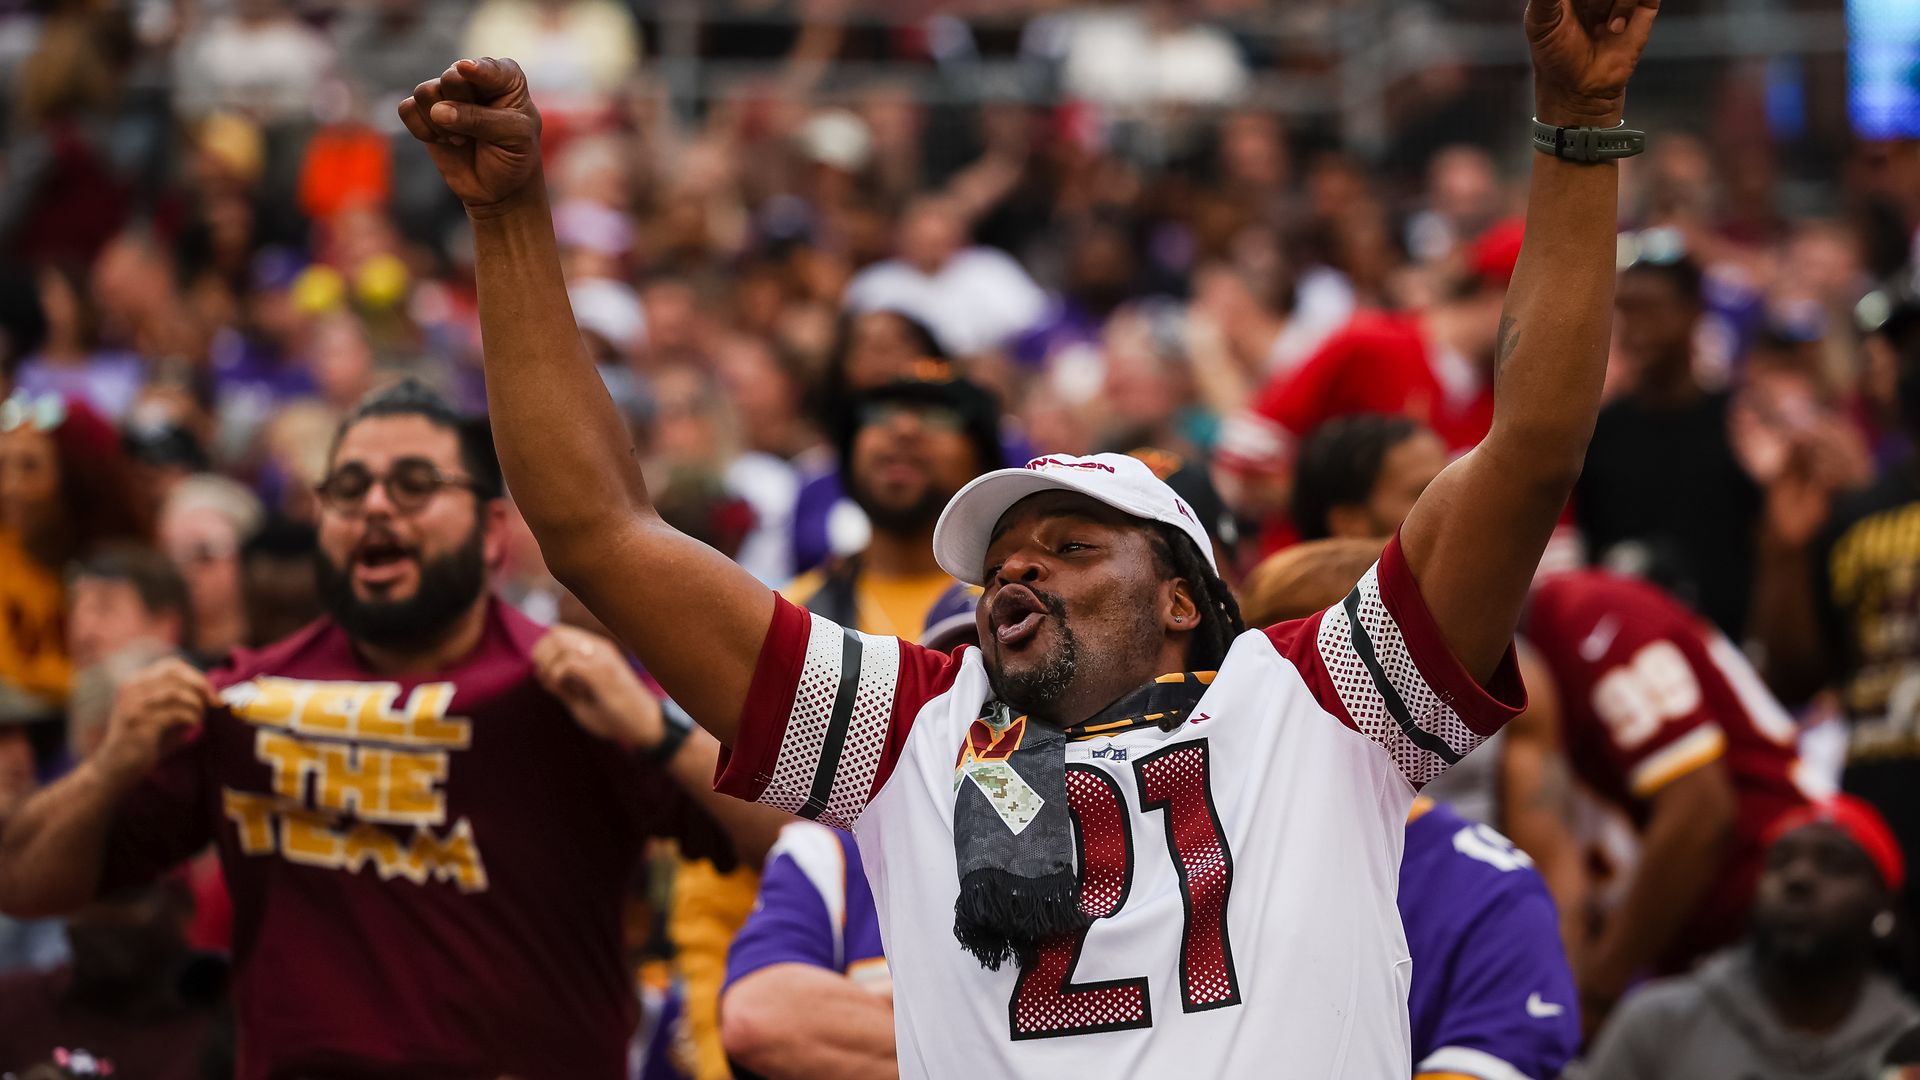 A Washington Commanders fan celebrates during the second half of the game against the Minnesota Vikings.